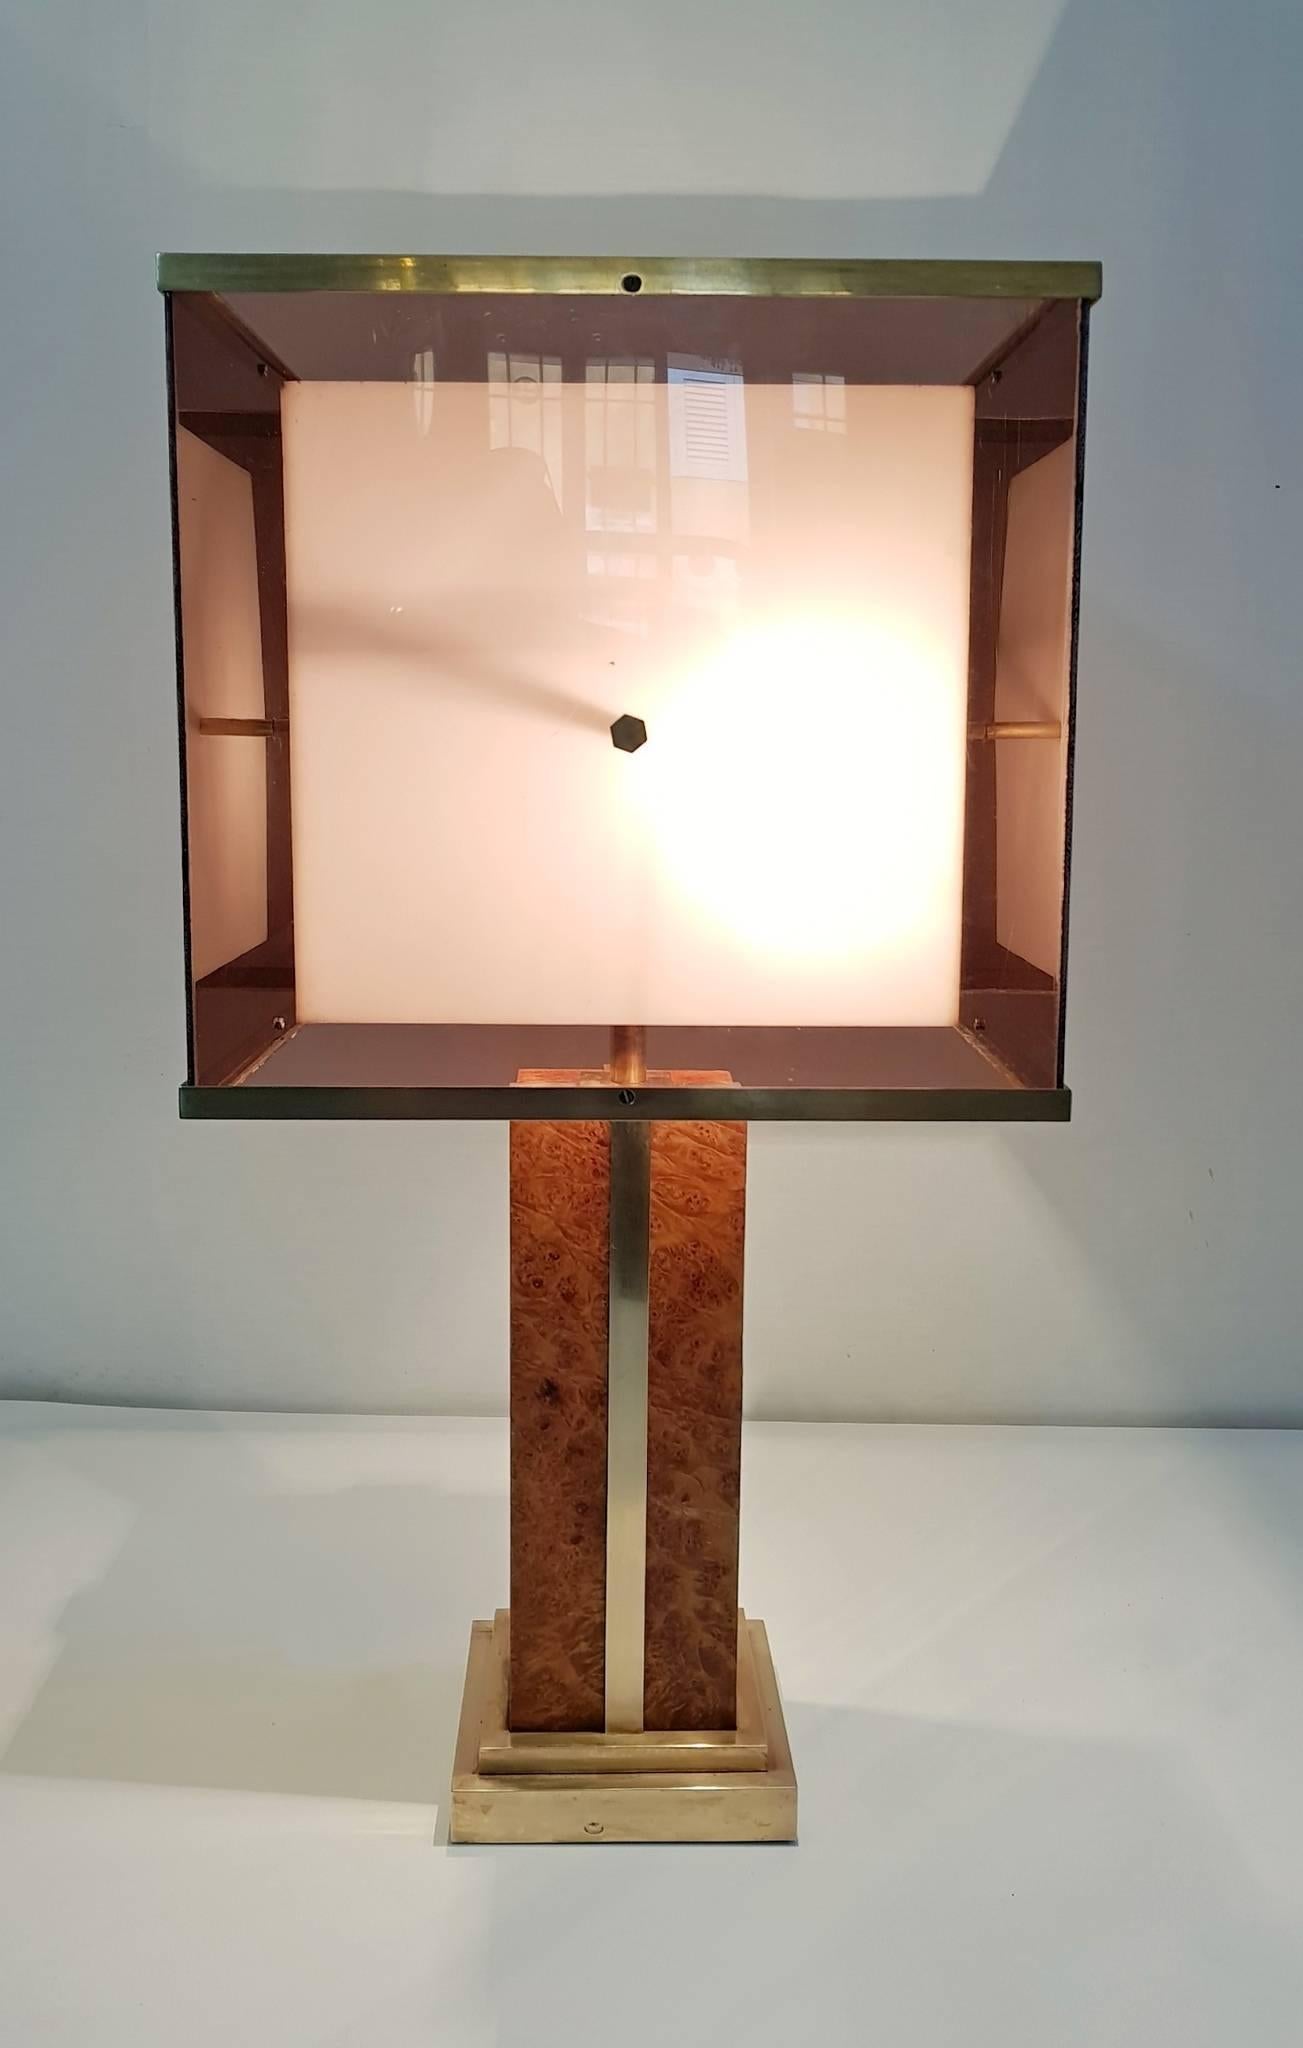 A lamp attributed to Romeo Rega with a base in burl wood and brass. As well as the original lampshade in two layers of plexiglass with the inner one being white and the outer in a smokey color which gives great Ambience when lit. In excellent